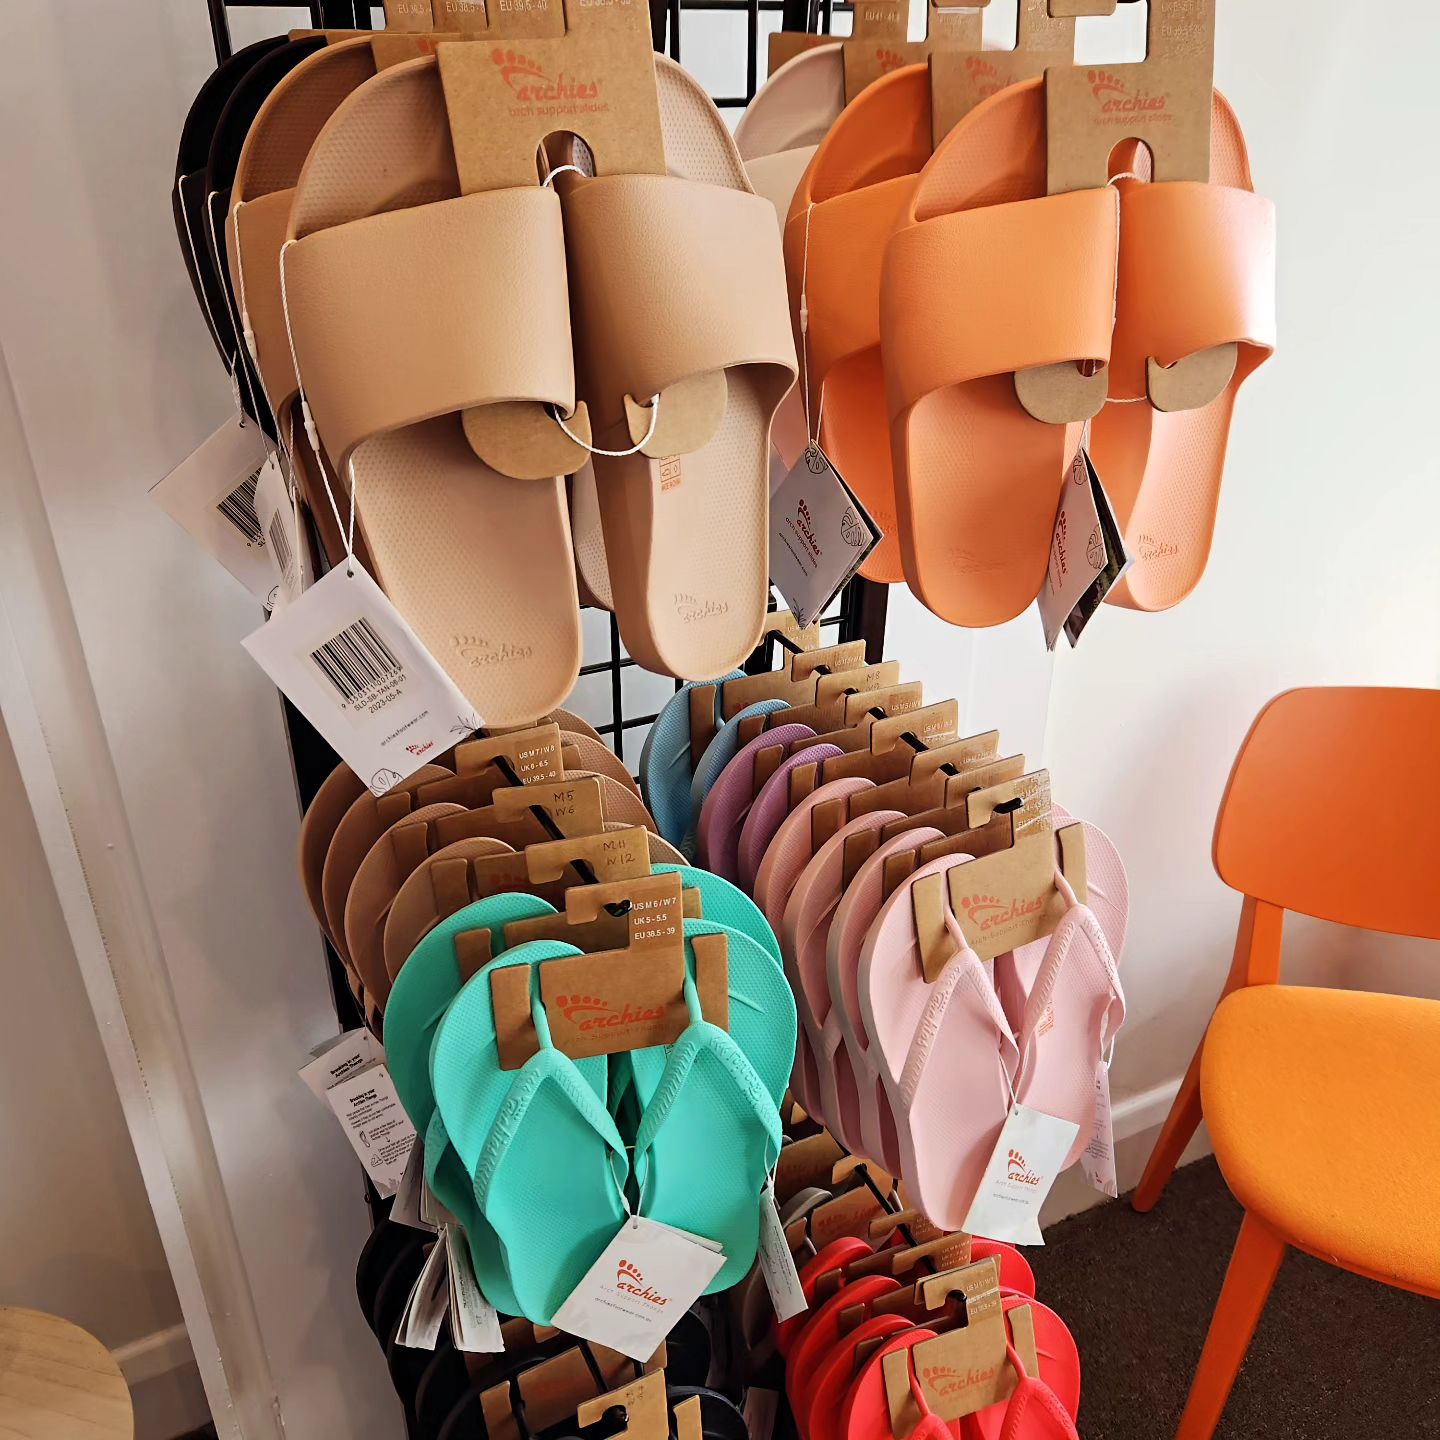 New Archies stock has arrived! We have many more sizes of thongs and slides  for you to try So comfy, you'll never take them off! - InnerStrength Bayside